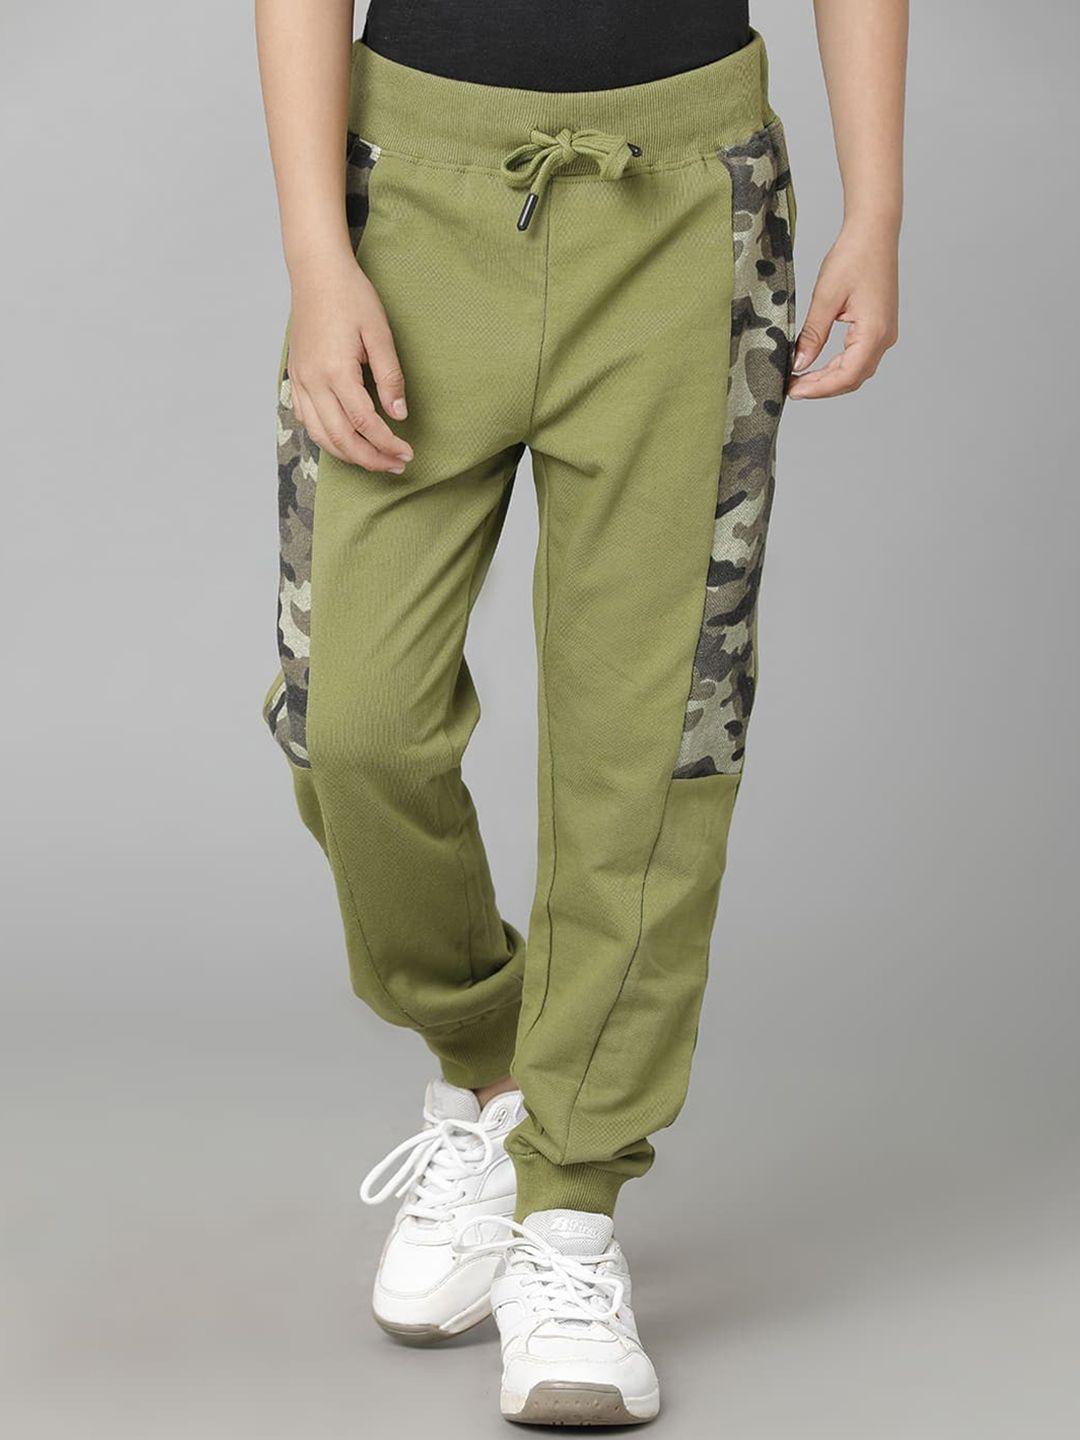 under-fourteen-only-kids-boys-cotton-mid-rise-joggers-trousers